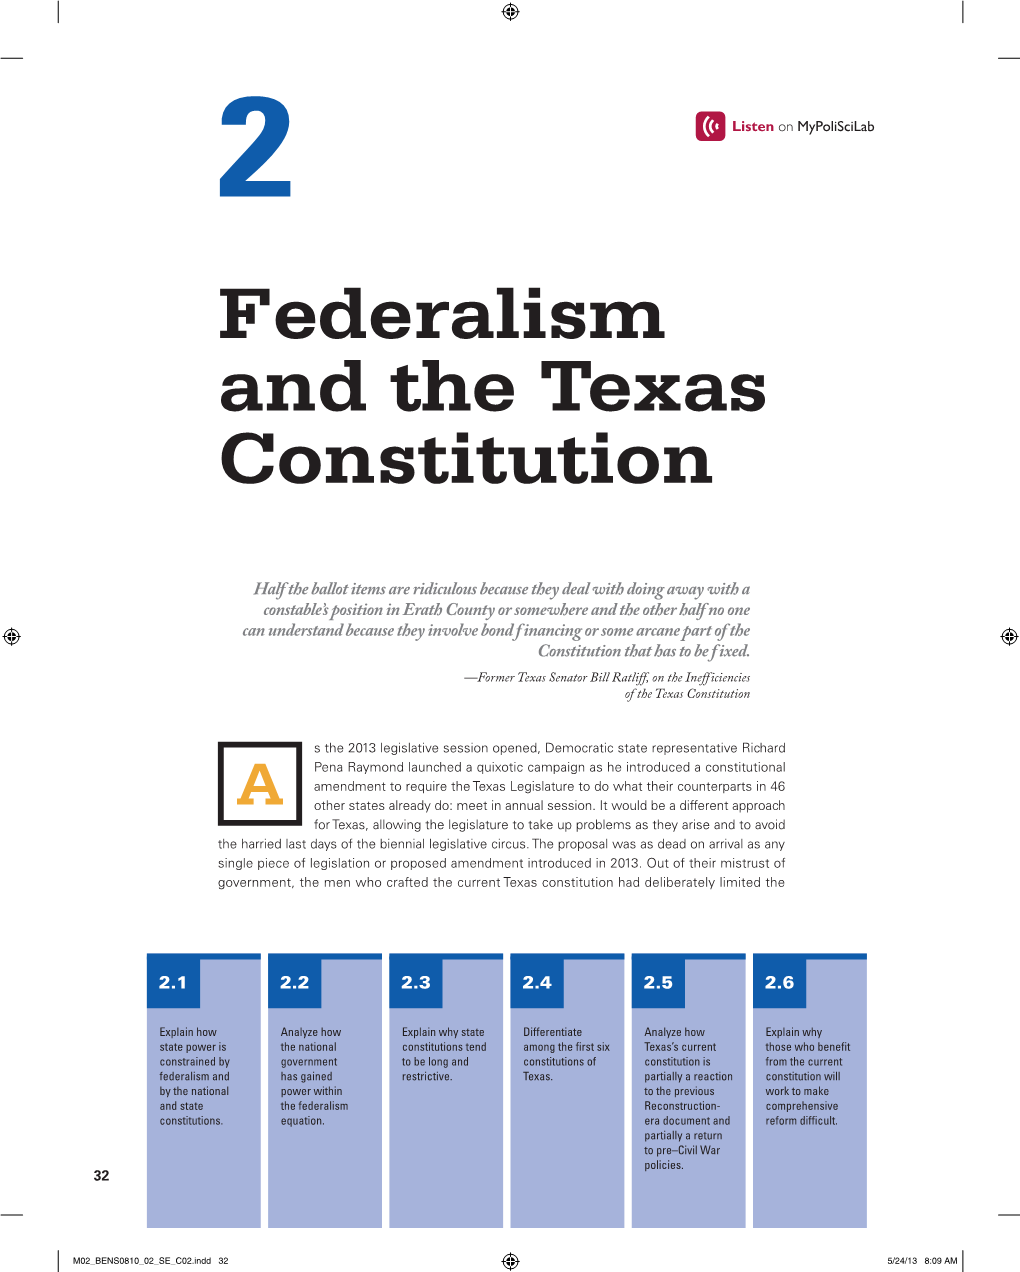 Federalism and the Texas Constitution